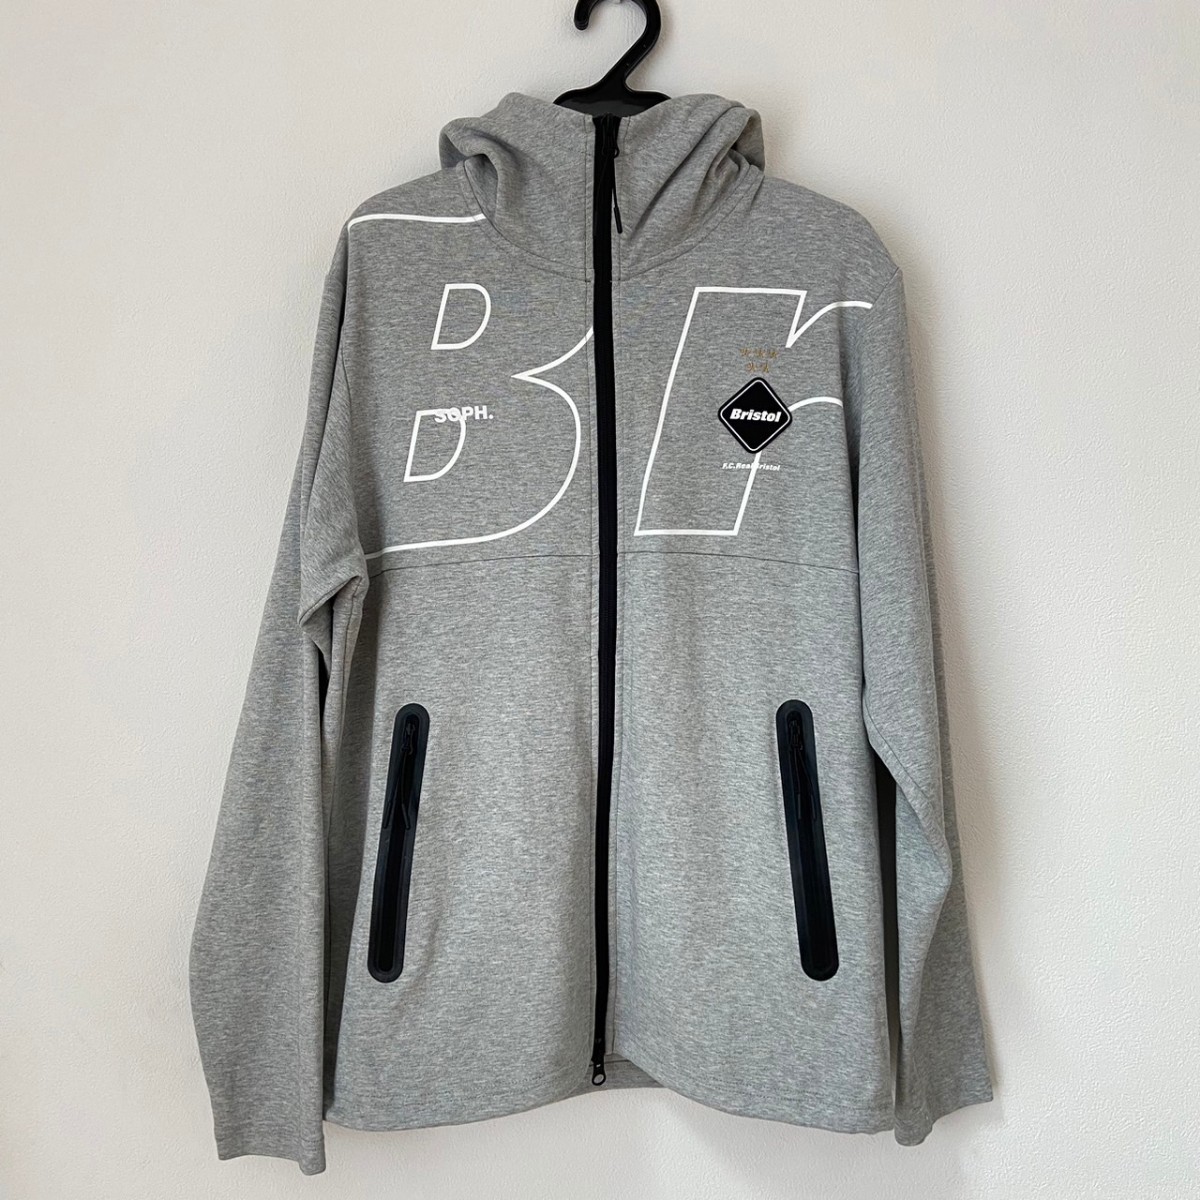 2020 S/S F.C.Real Bristol RELAX FIT ZIP UP　HOODIE グレー S USED品 FCRB-20057 ジップパーカー ジップアップ スウェット